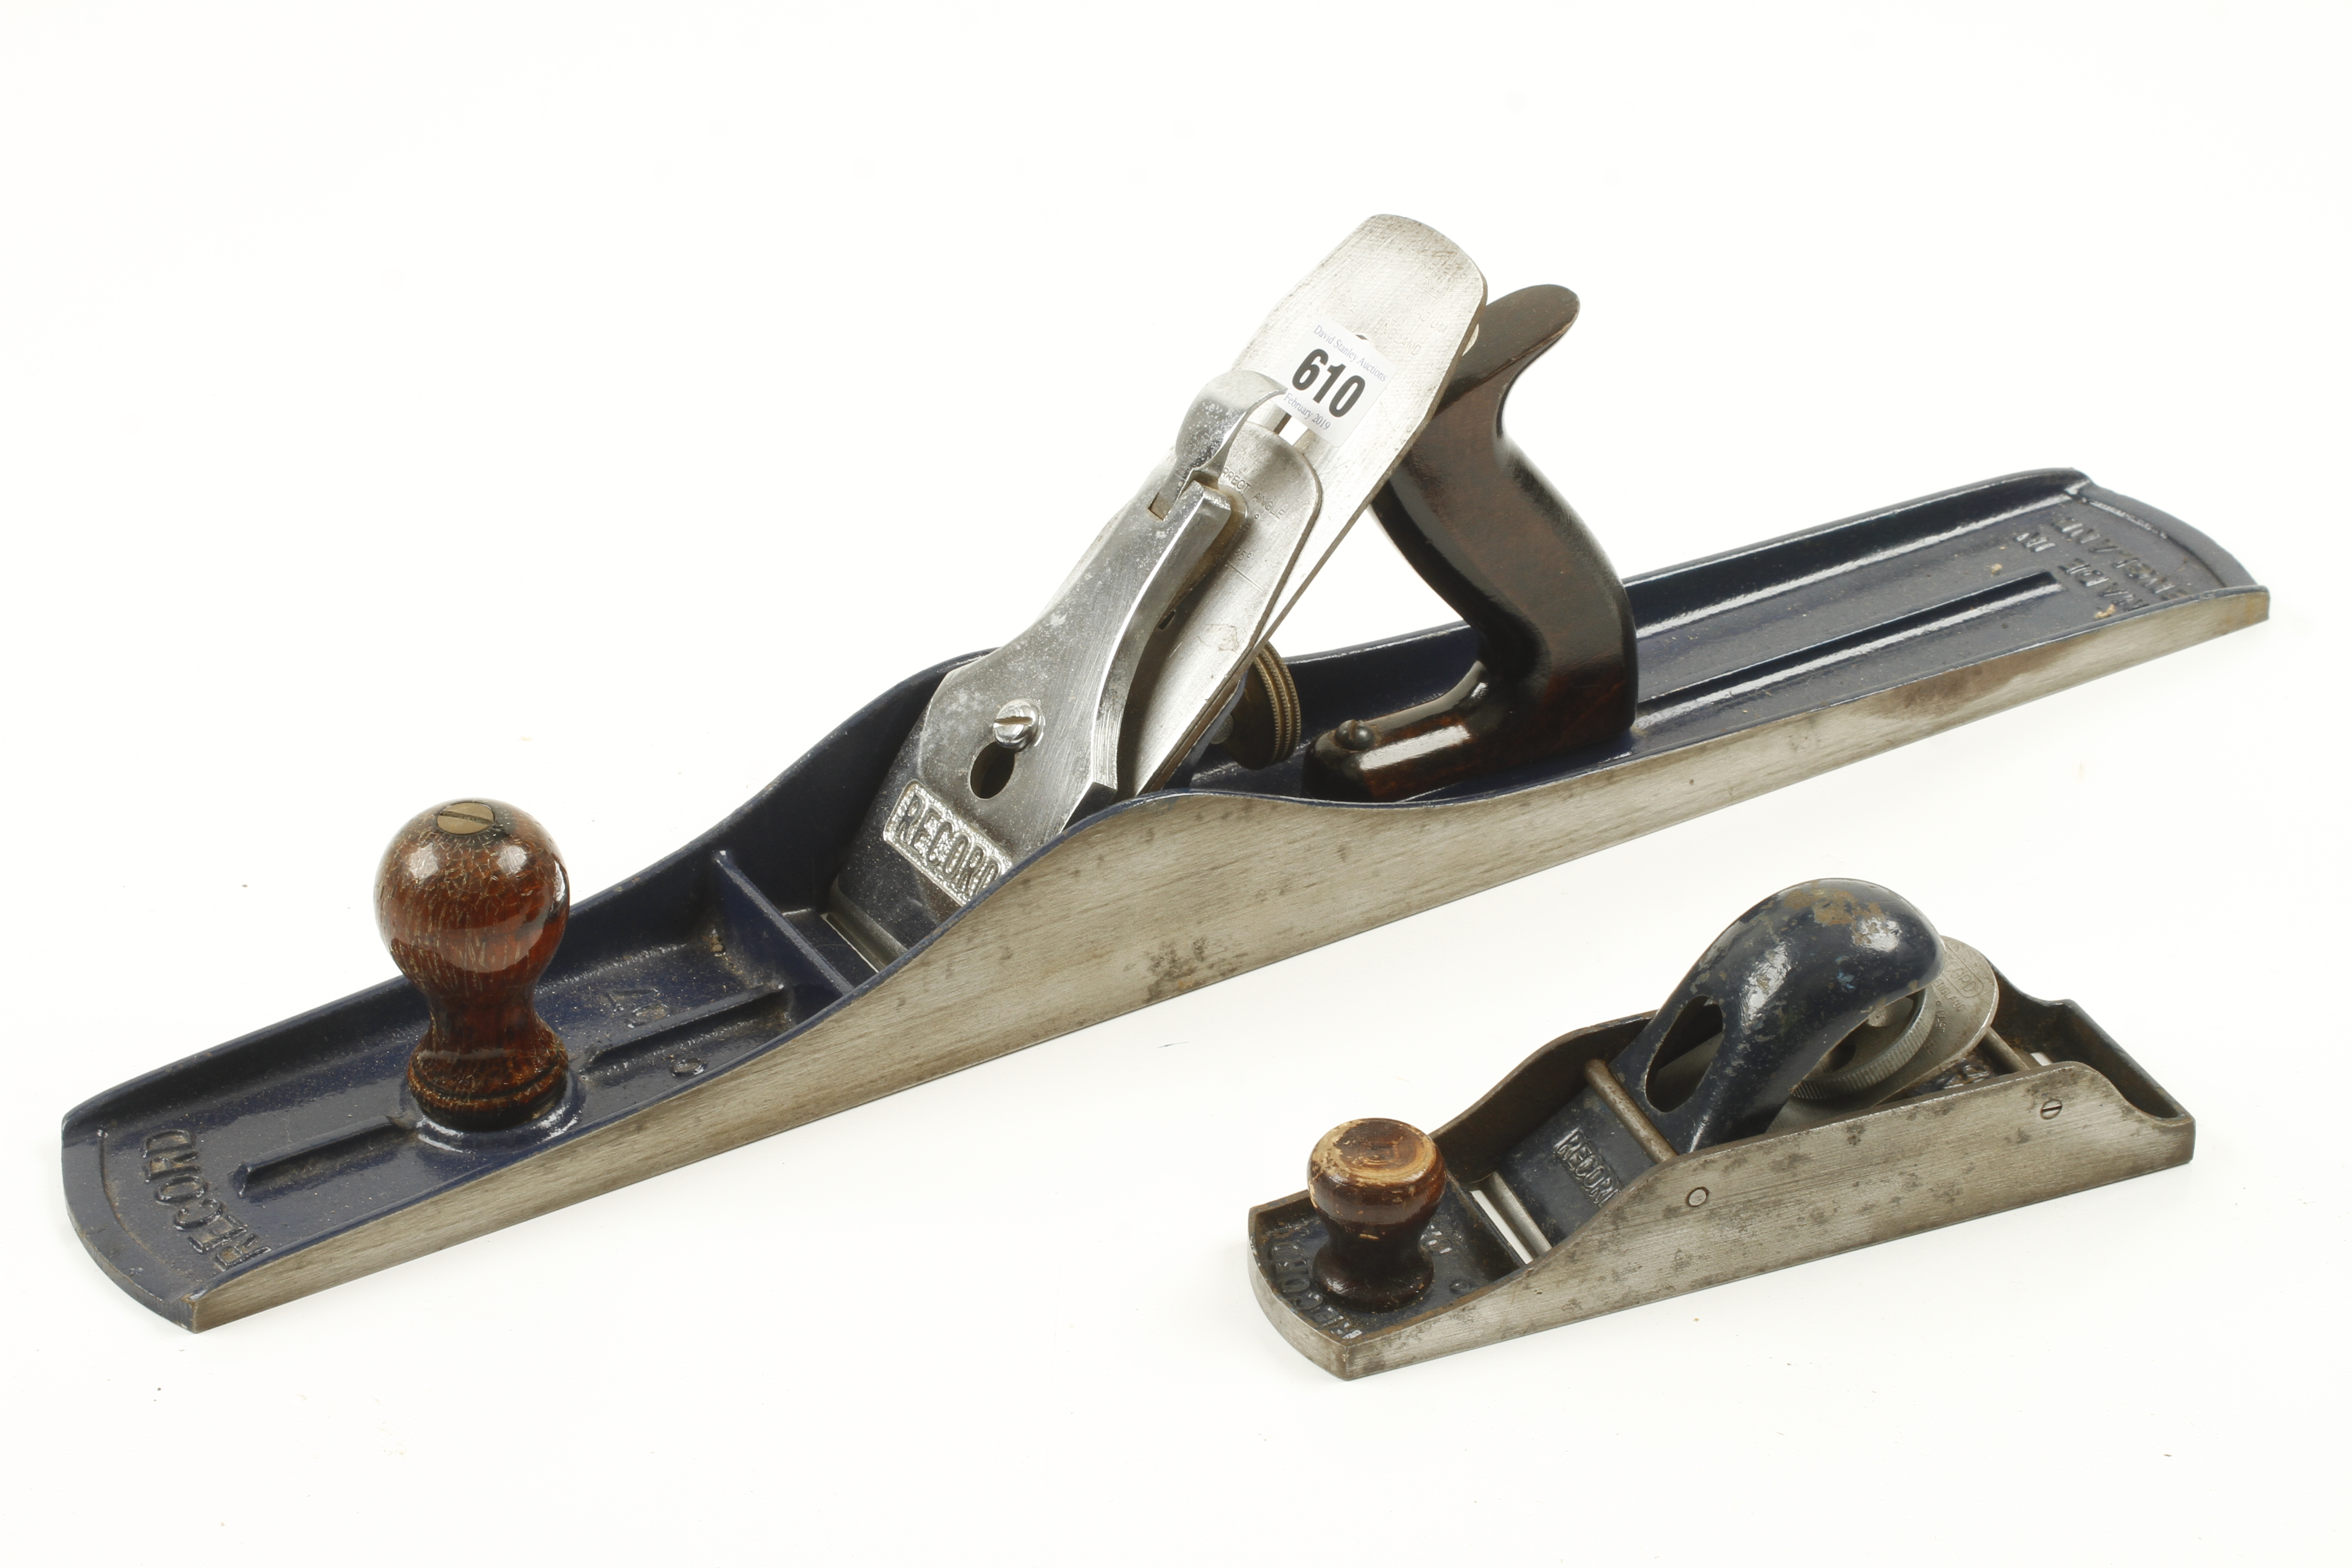 A recent RECORD No 07 jointer and a No 0130 double end block plane G++